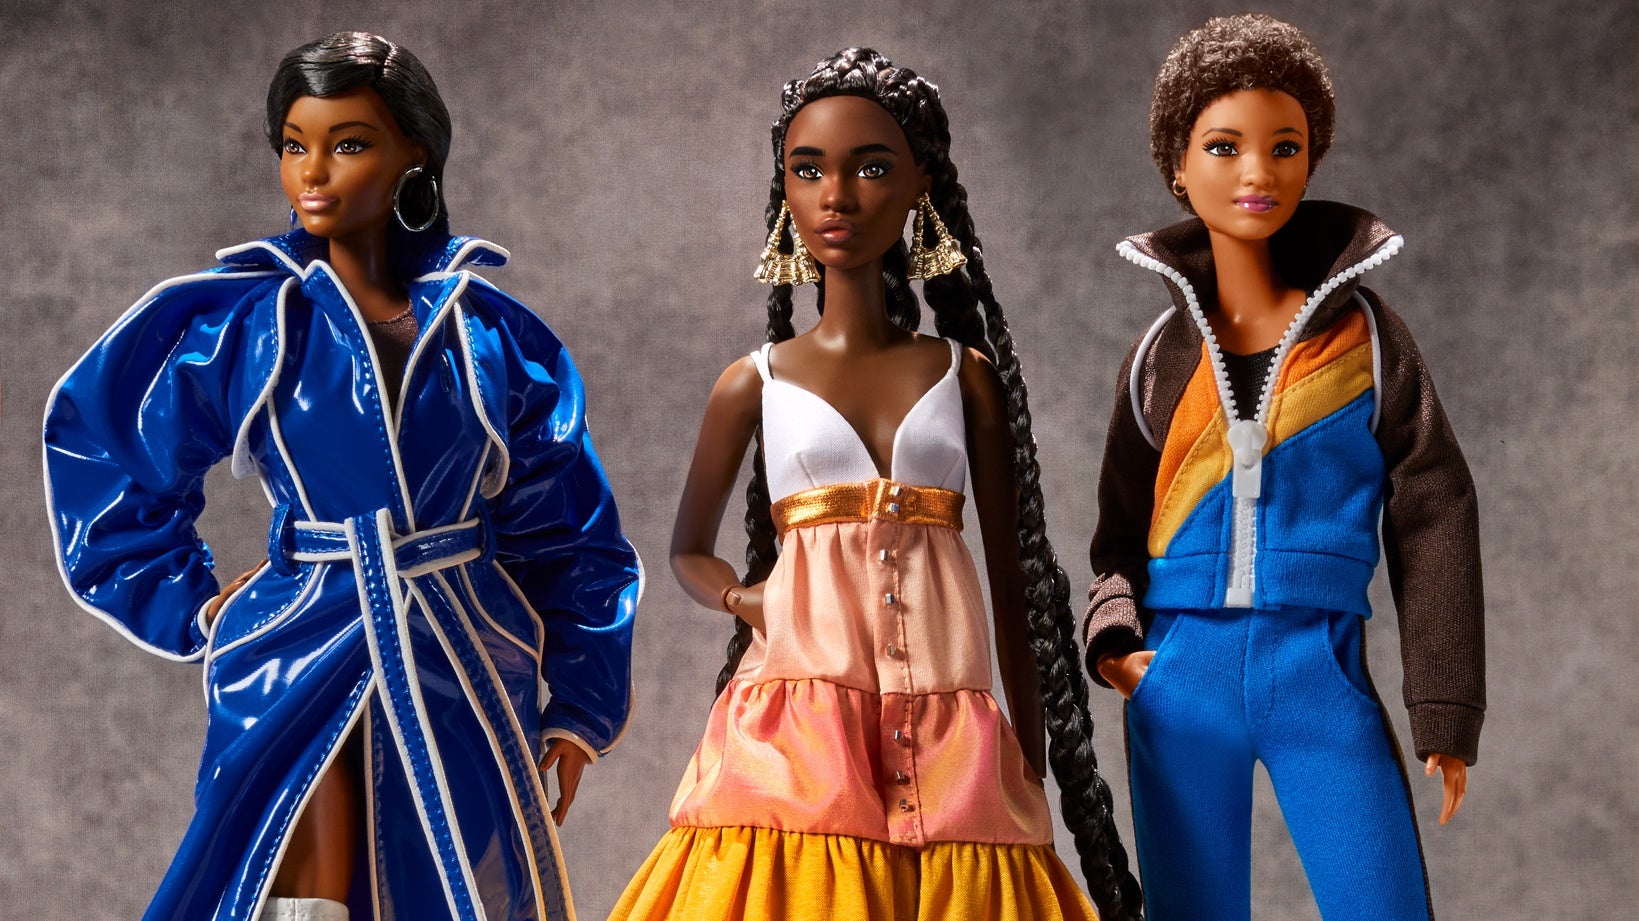 Barbie launches new line of 'career dolls' celebrating women in film